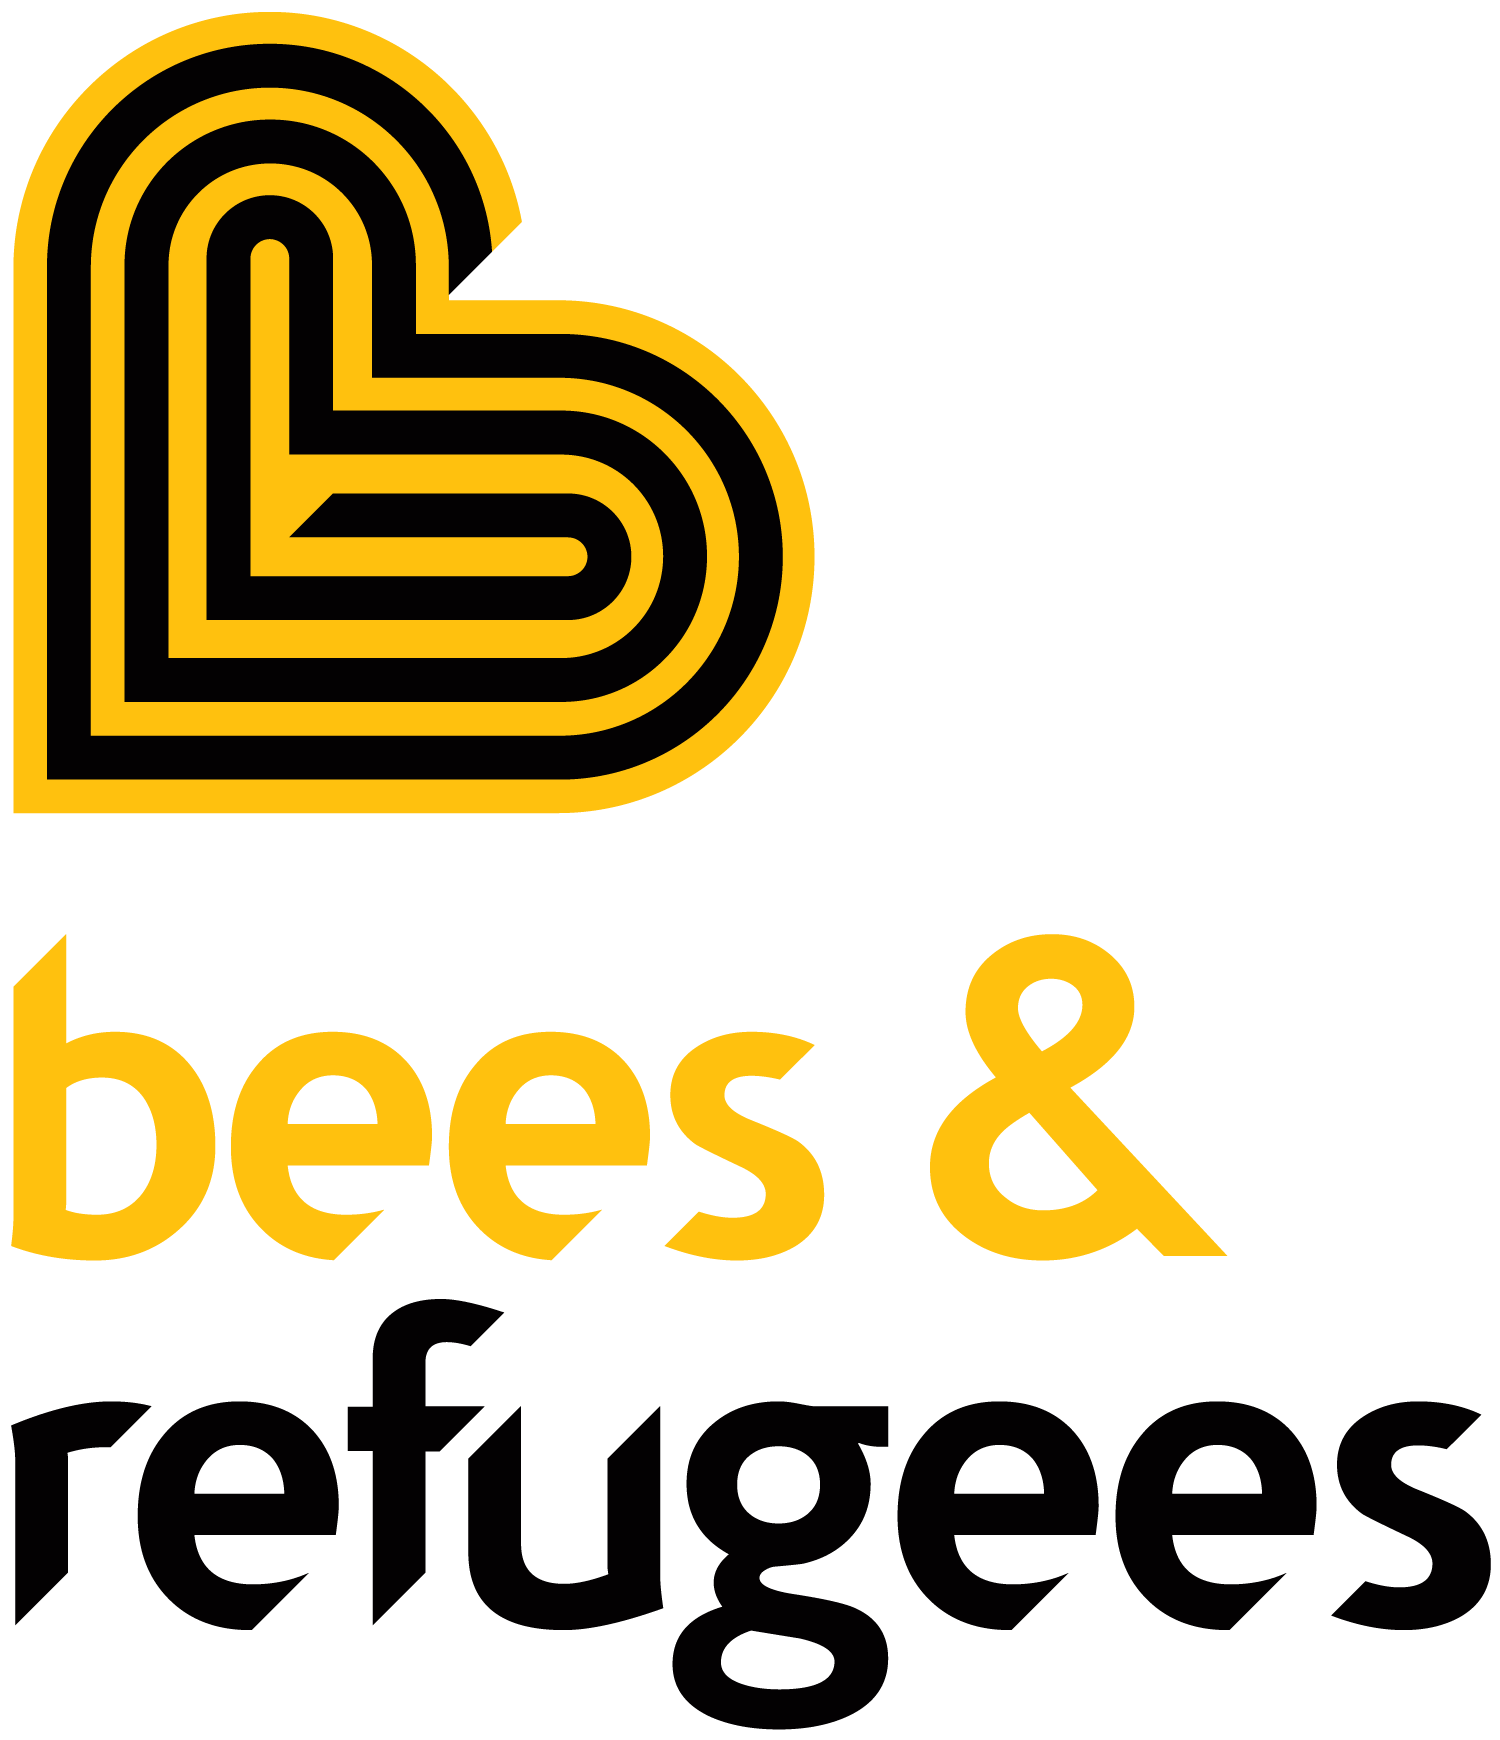 Bees & Refugees